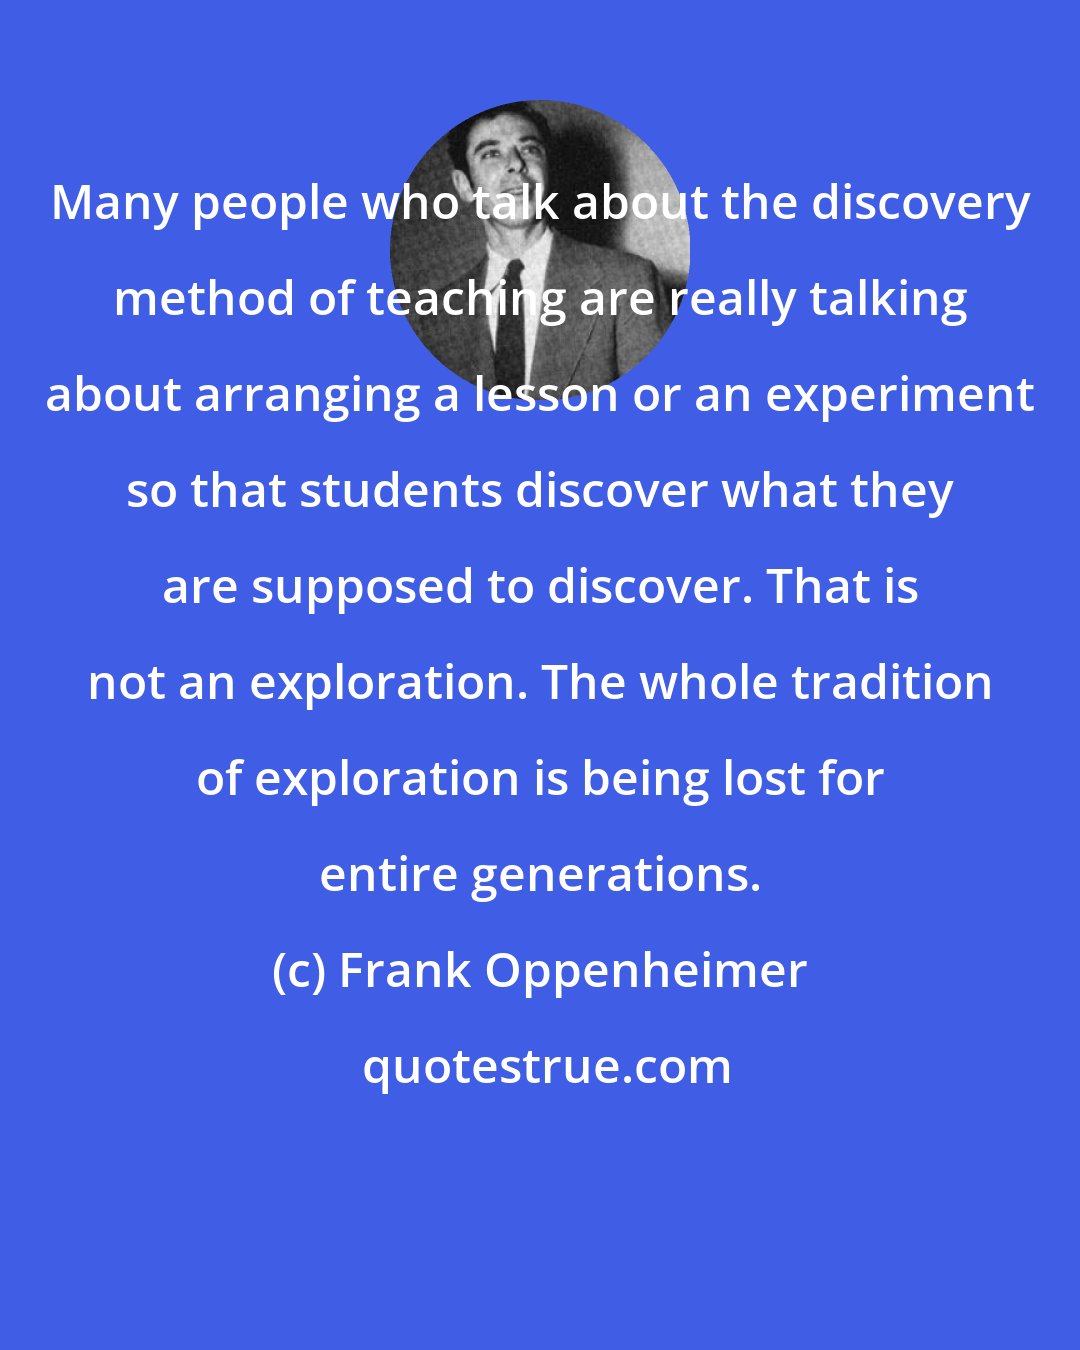 Frank Oppenheimer: Many people who talk about the discovery method of teaching are really talking about arranging a lesson or an experiment so that students discover what they are supposed to discover. That is not an exploration. The whole tradition of exploration is being lost for entire generations.